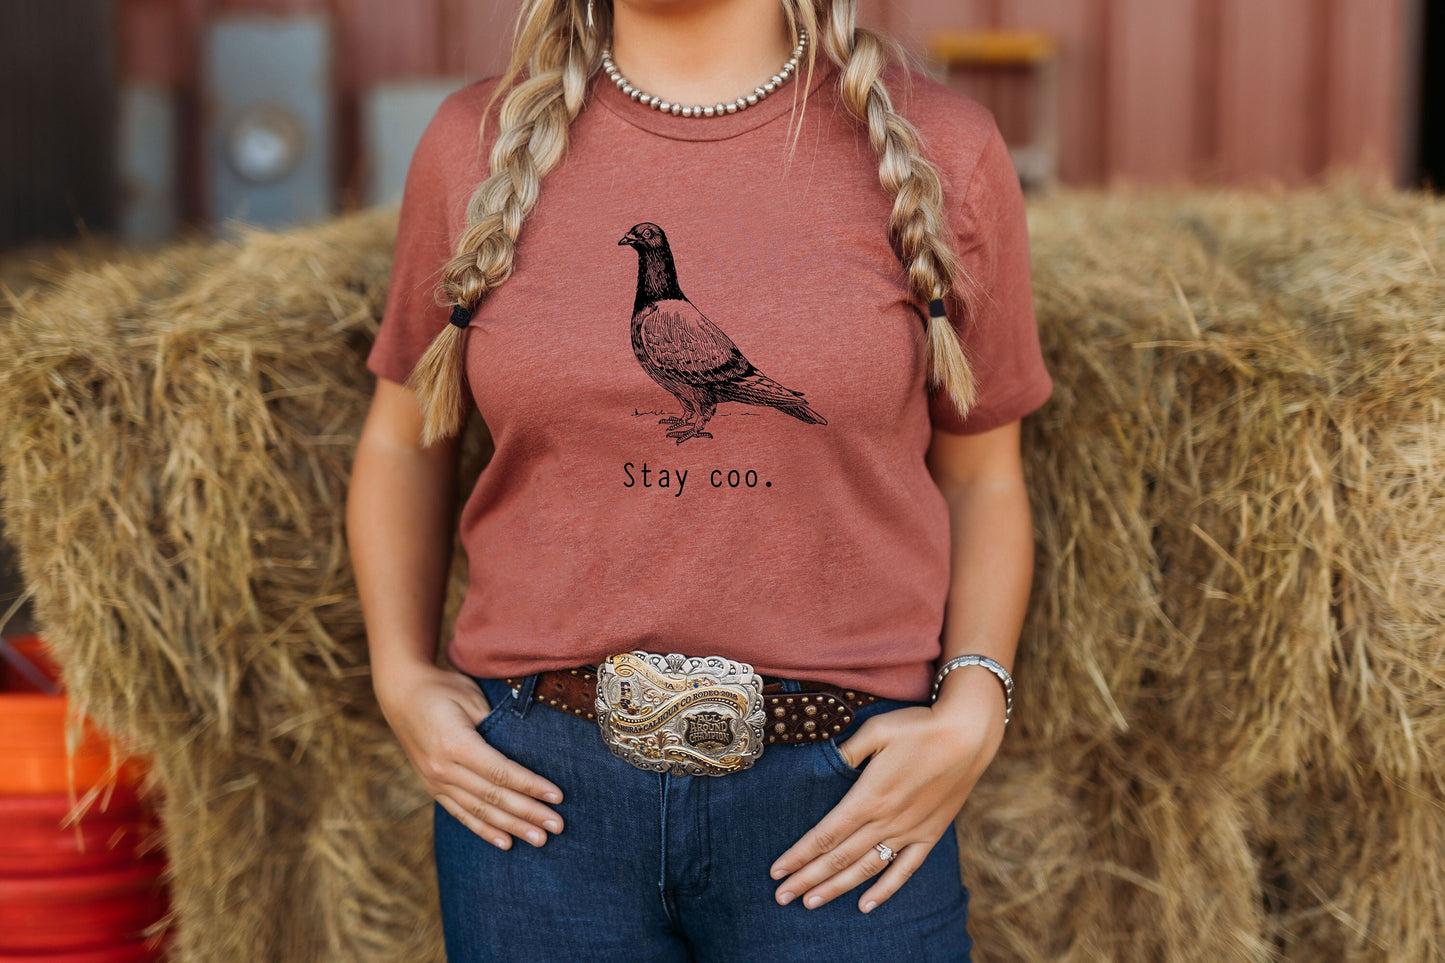 Stay Coo Pigeon Bird Funny Animal Play on Words Unisex Soft Tee T-shirt for Women or Men